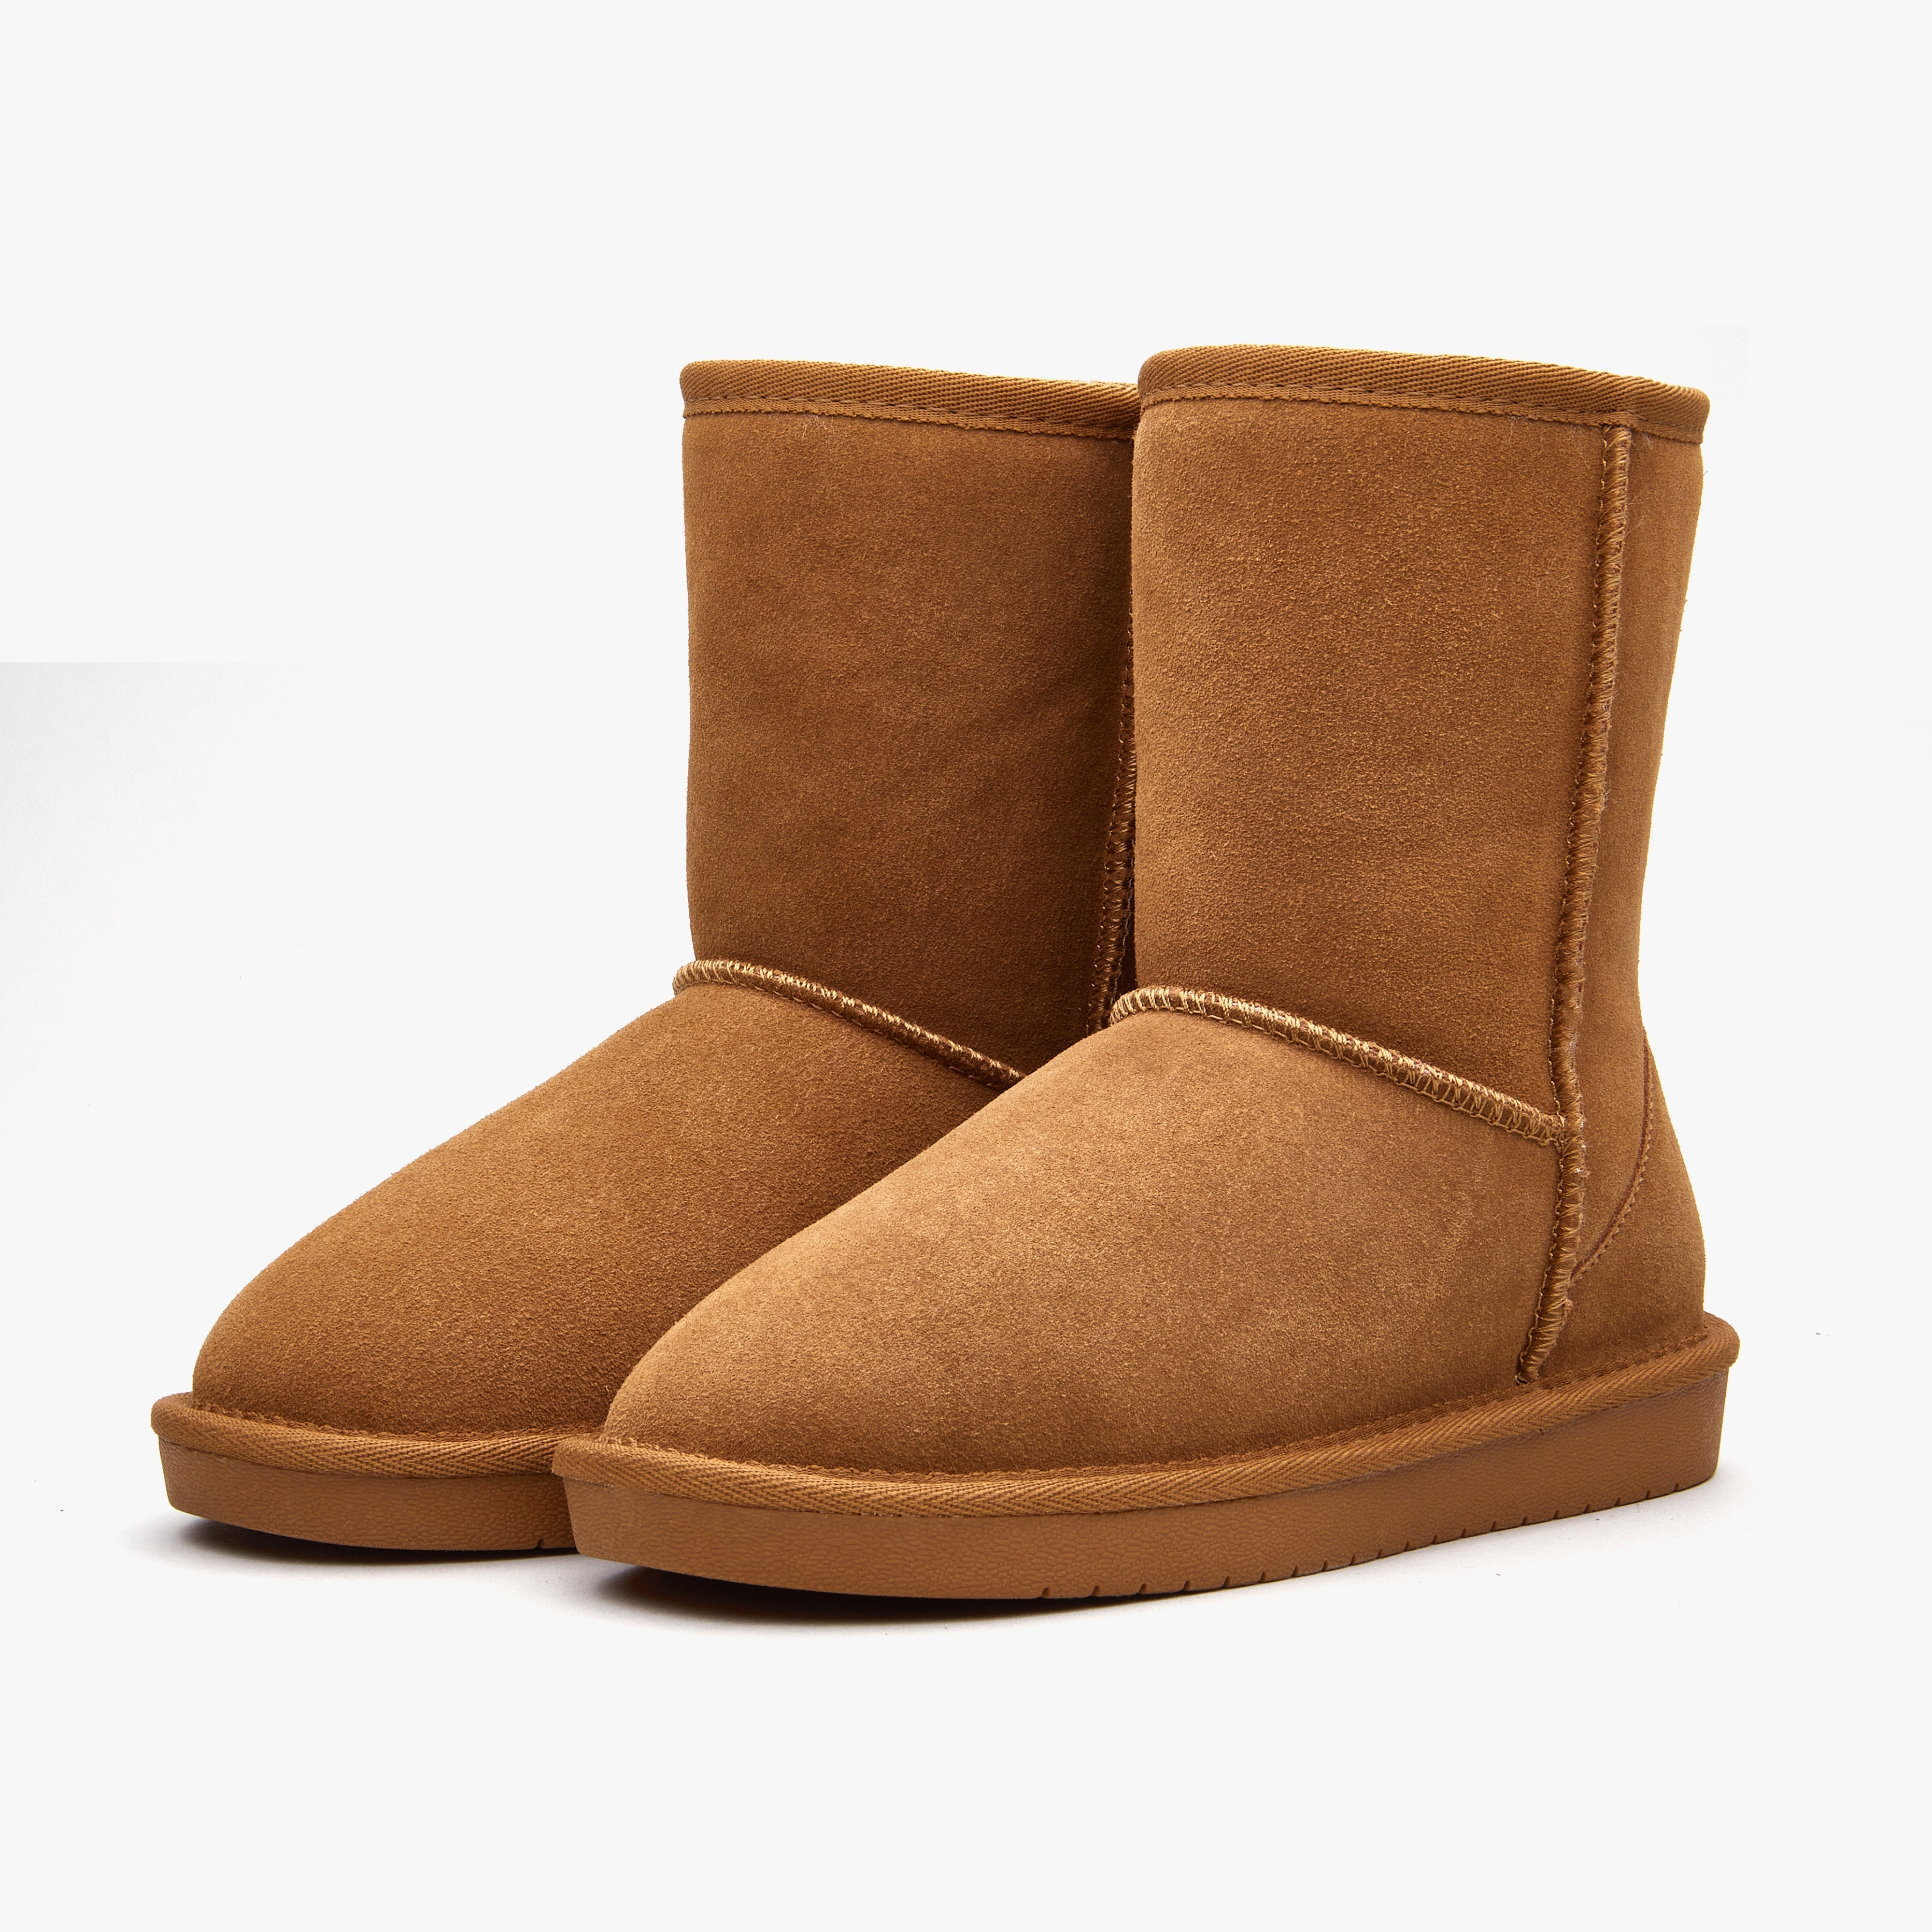 Women Classic Mid-Calf Suede Winter Snow Boots